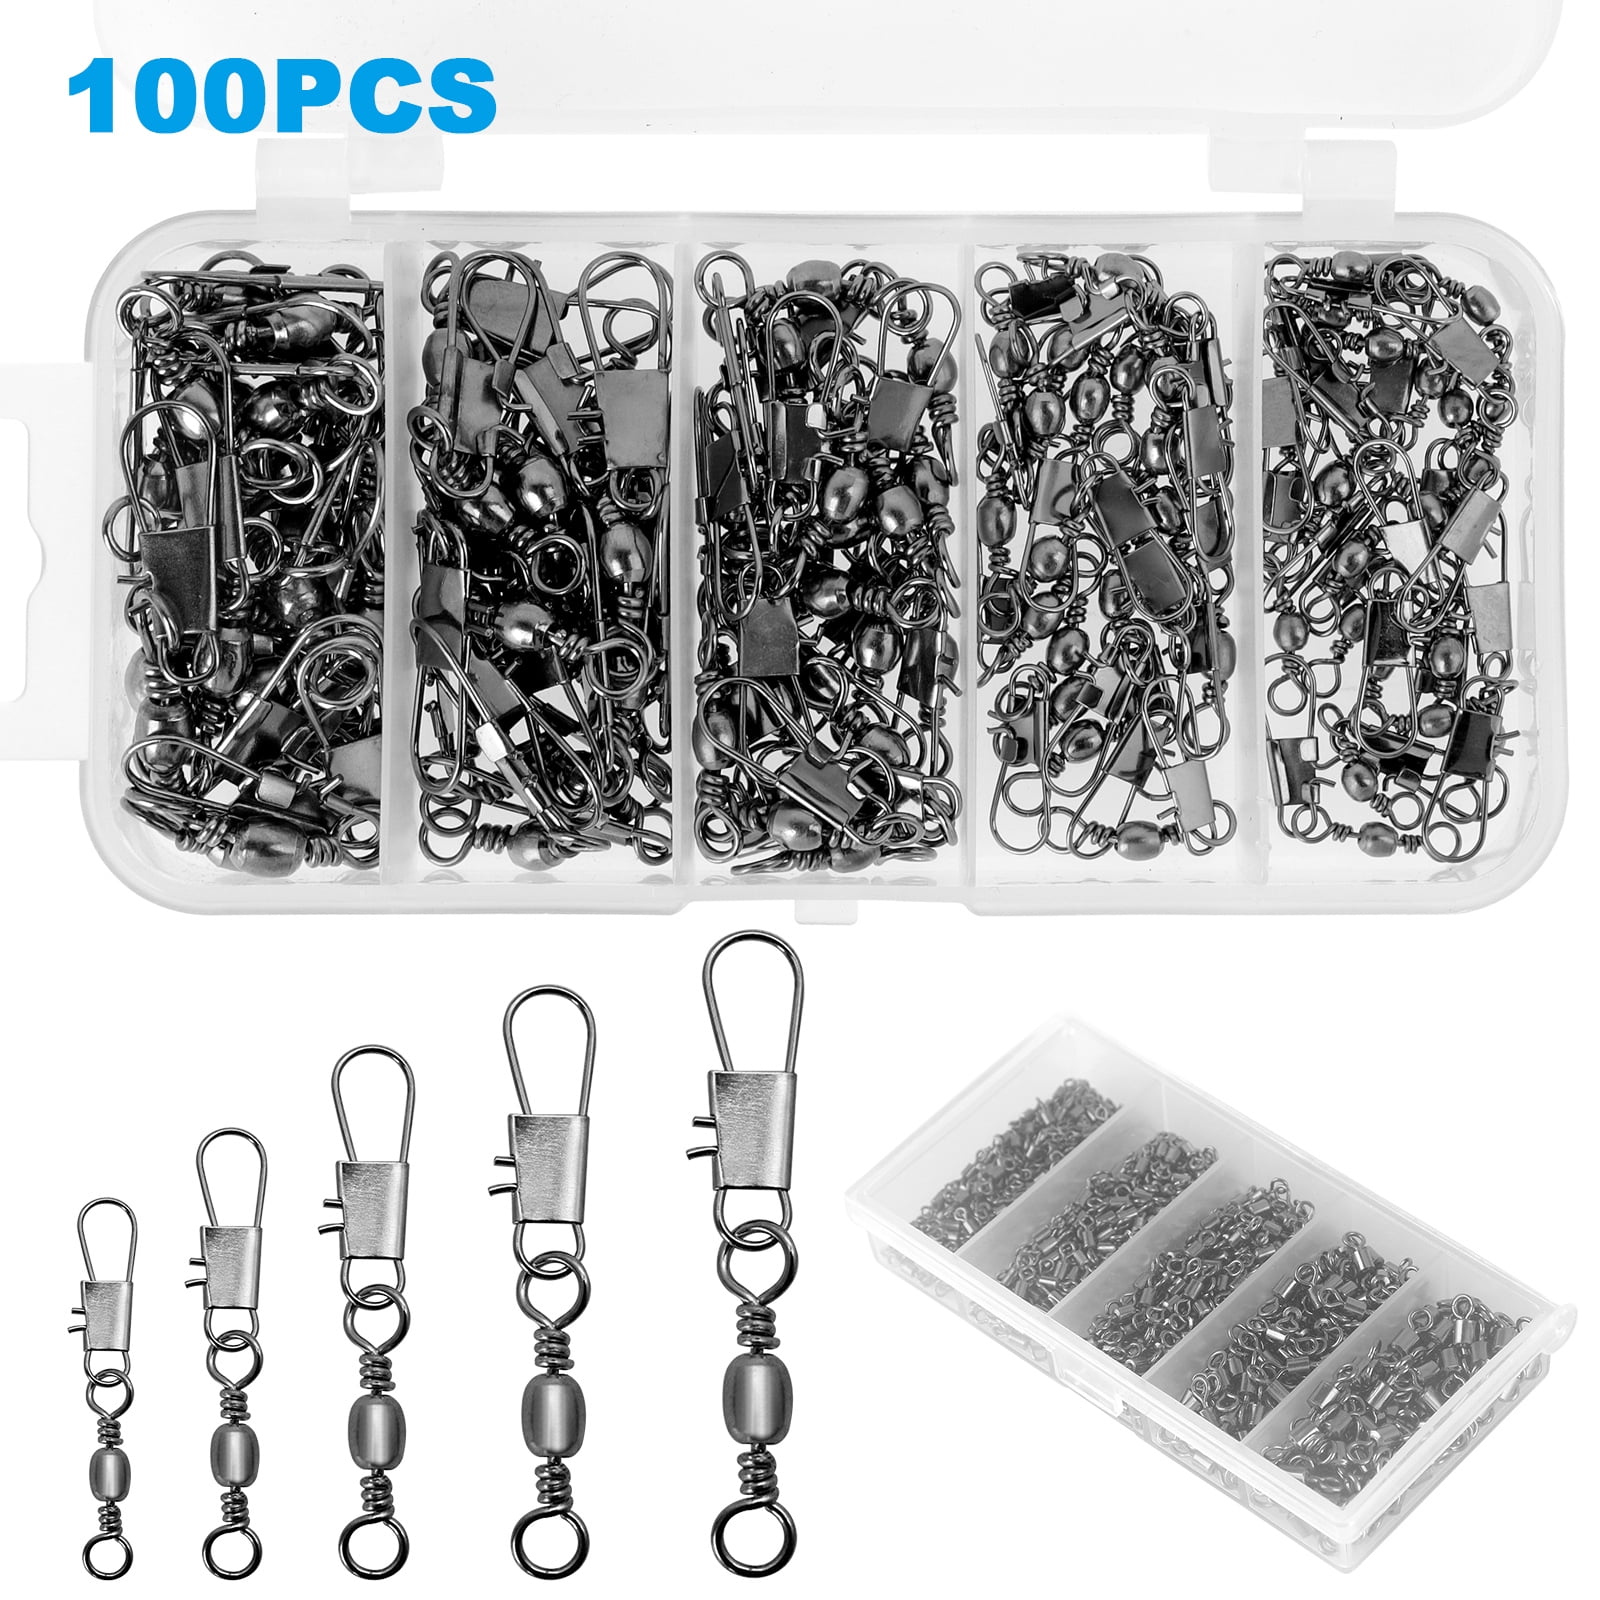 100pcs Fishing Swivels, Fishing Rolling Ball Bearing Barrel Swivel with  Safety Snaps High Strength Fishing Connector Swivels Stainless Steel  Saltwater